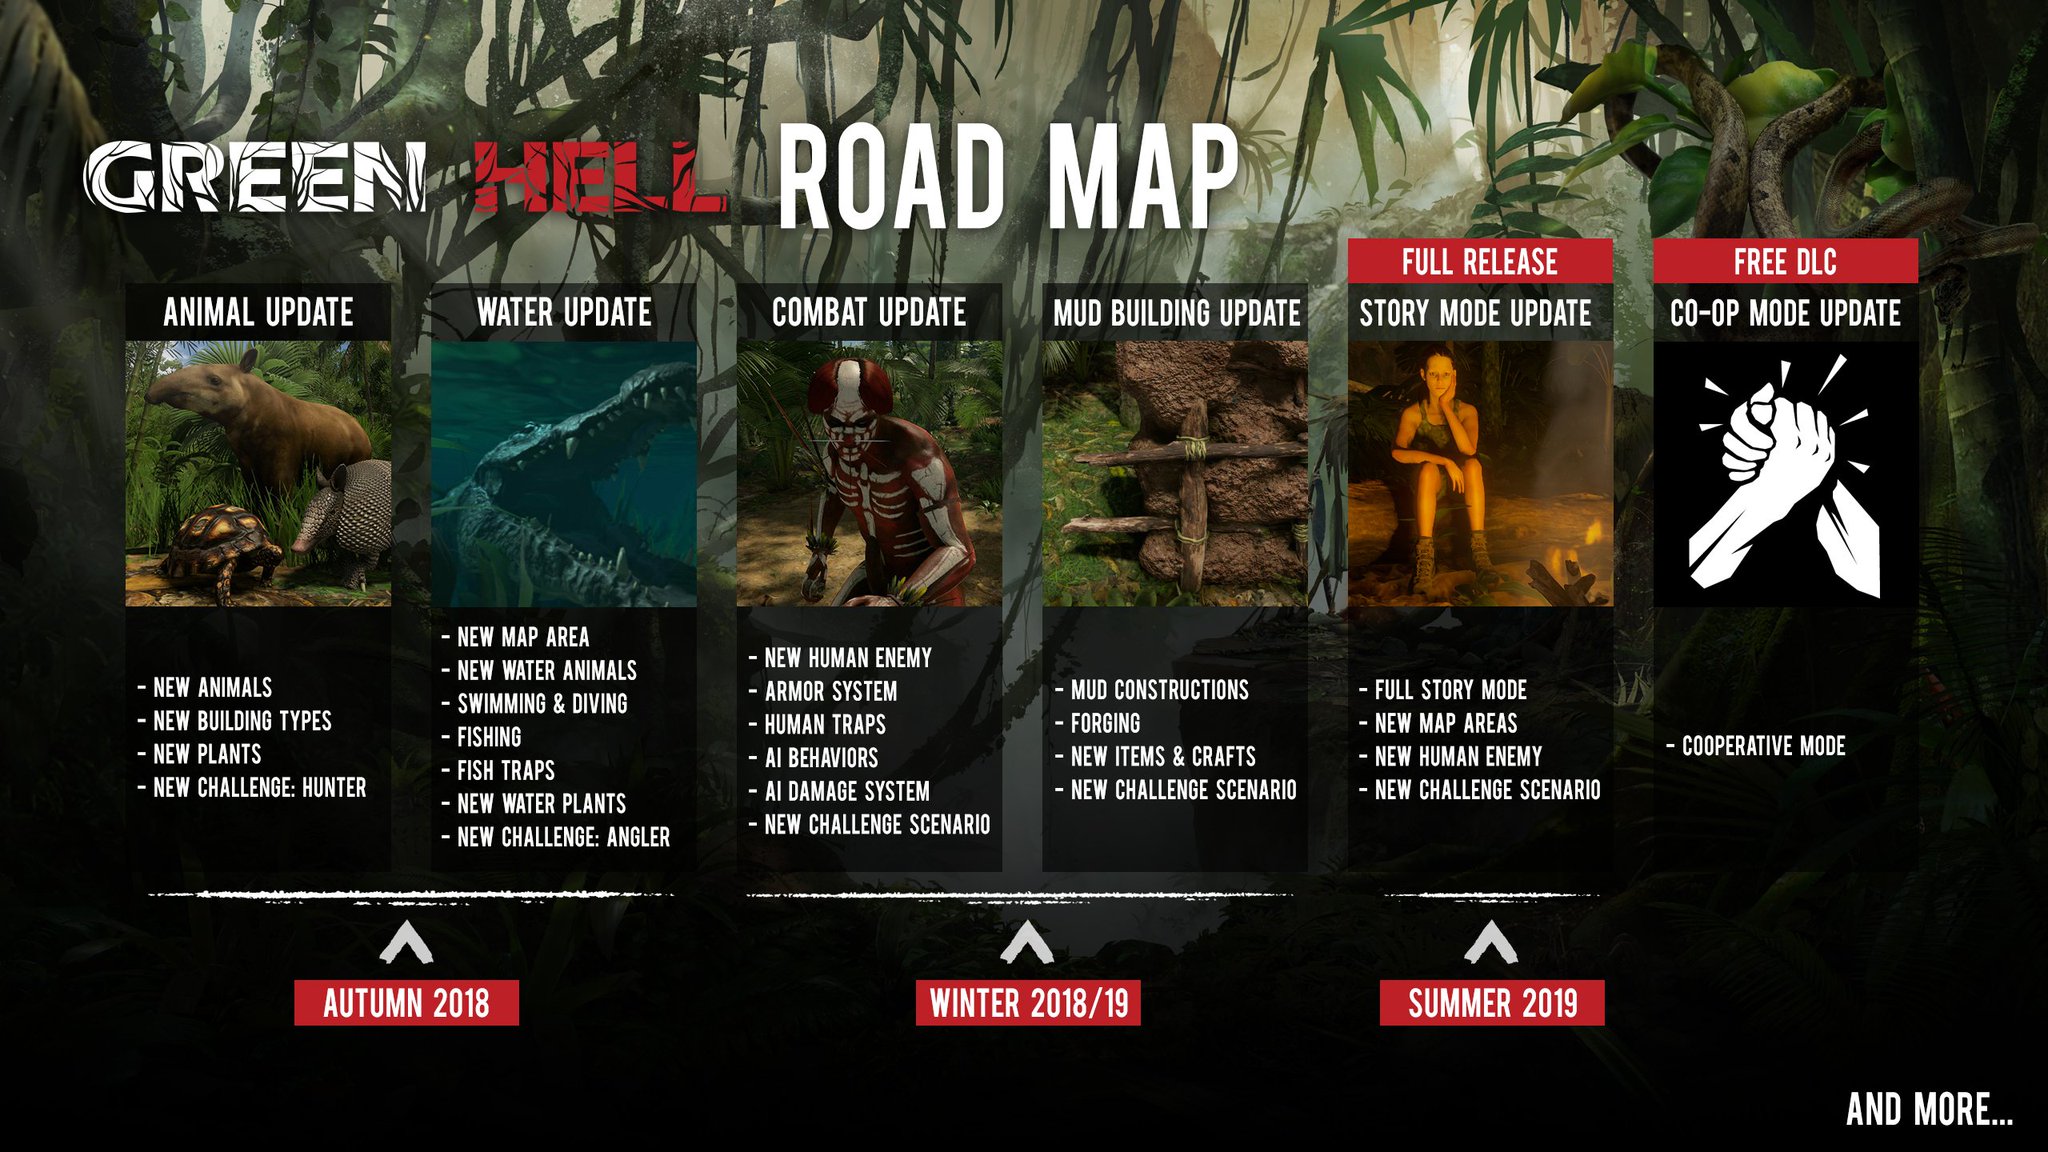 Green Hell Our Updated Roadmap Prepare Yourselves For The Next Content Patch The Mud Building Update